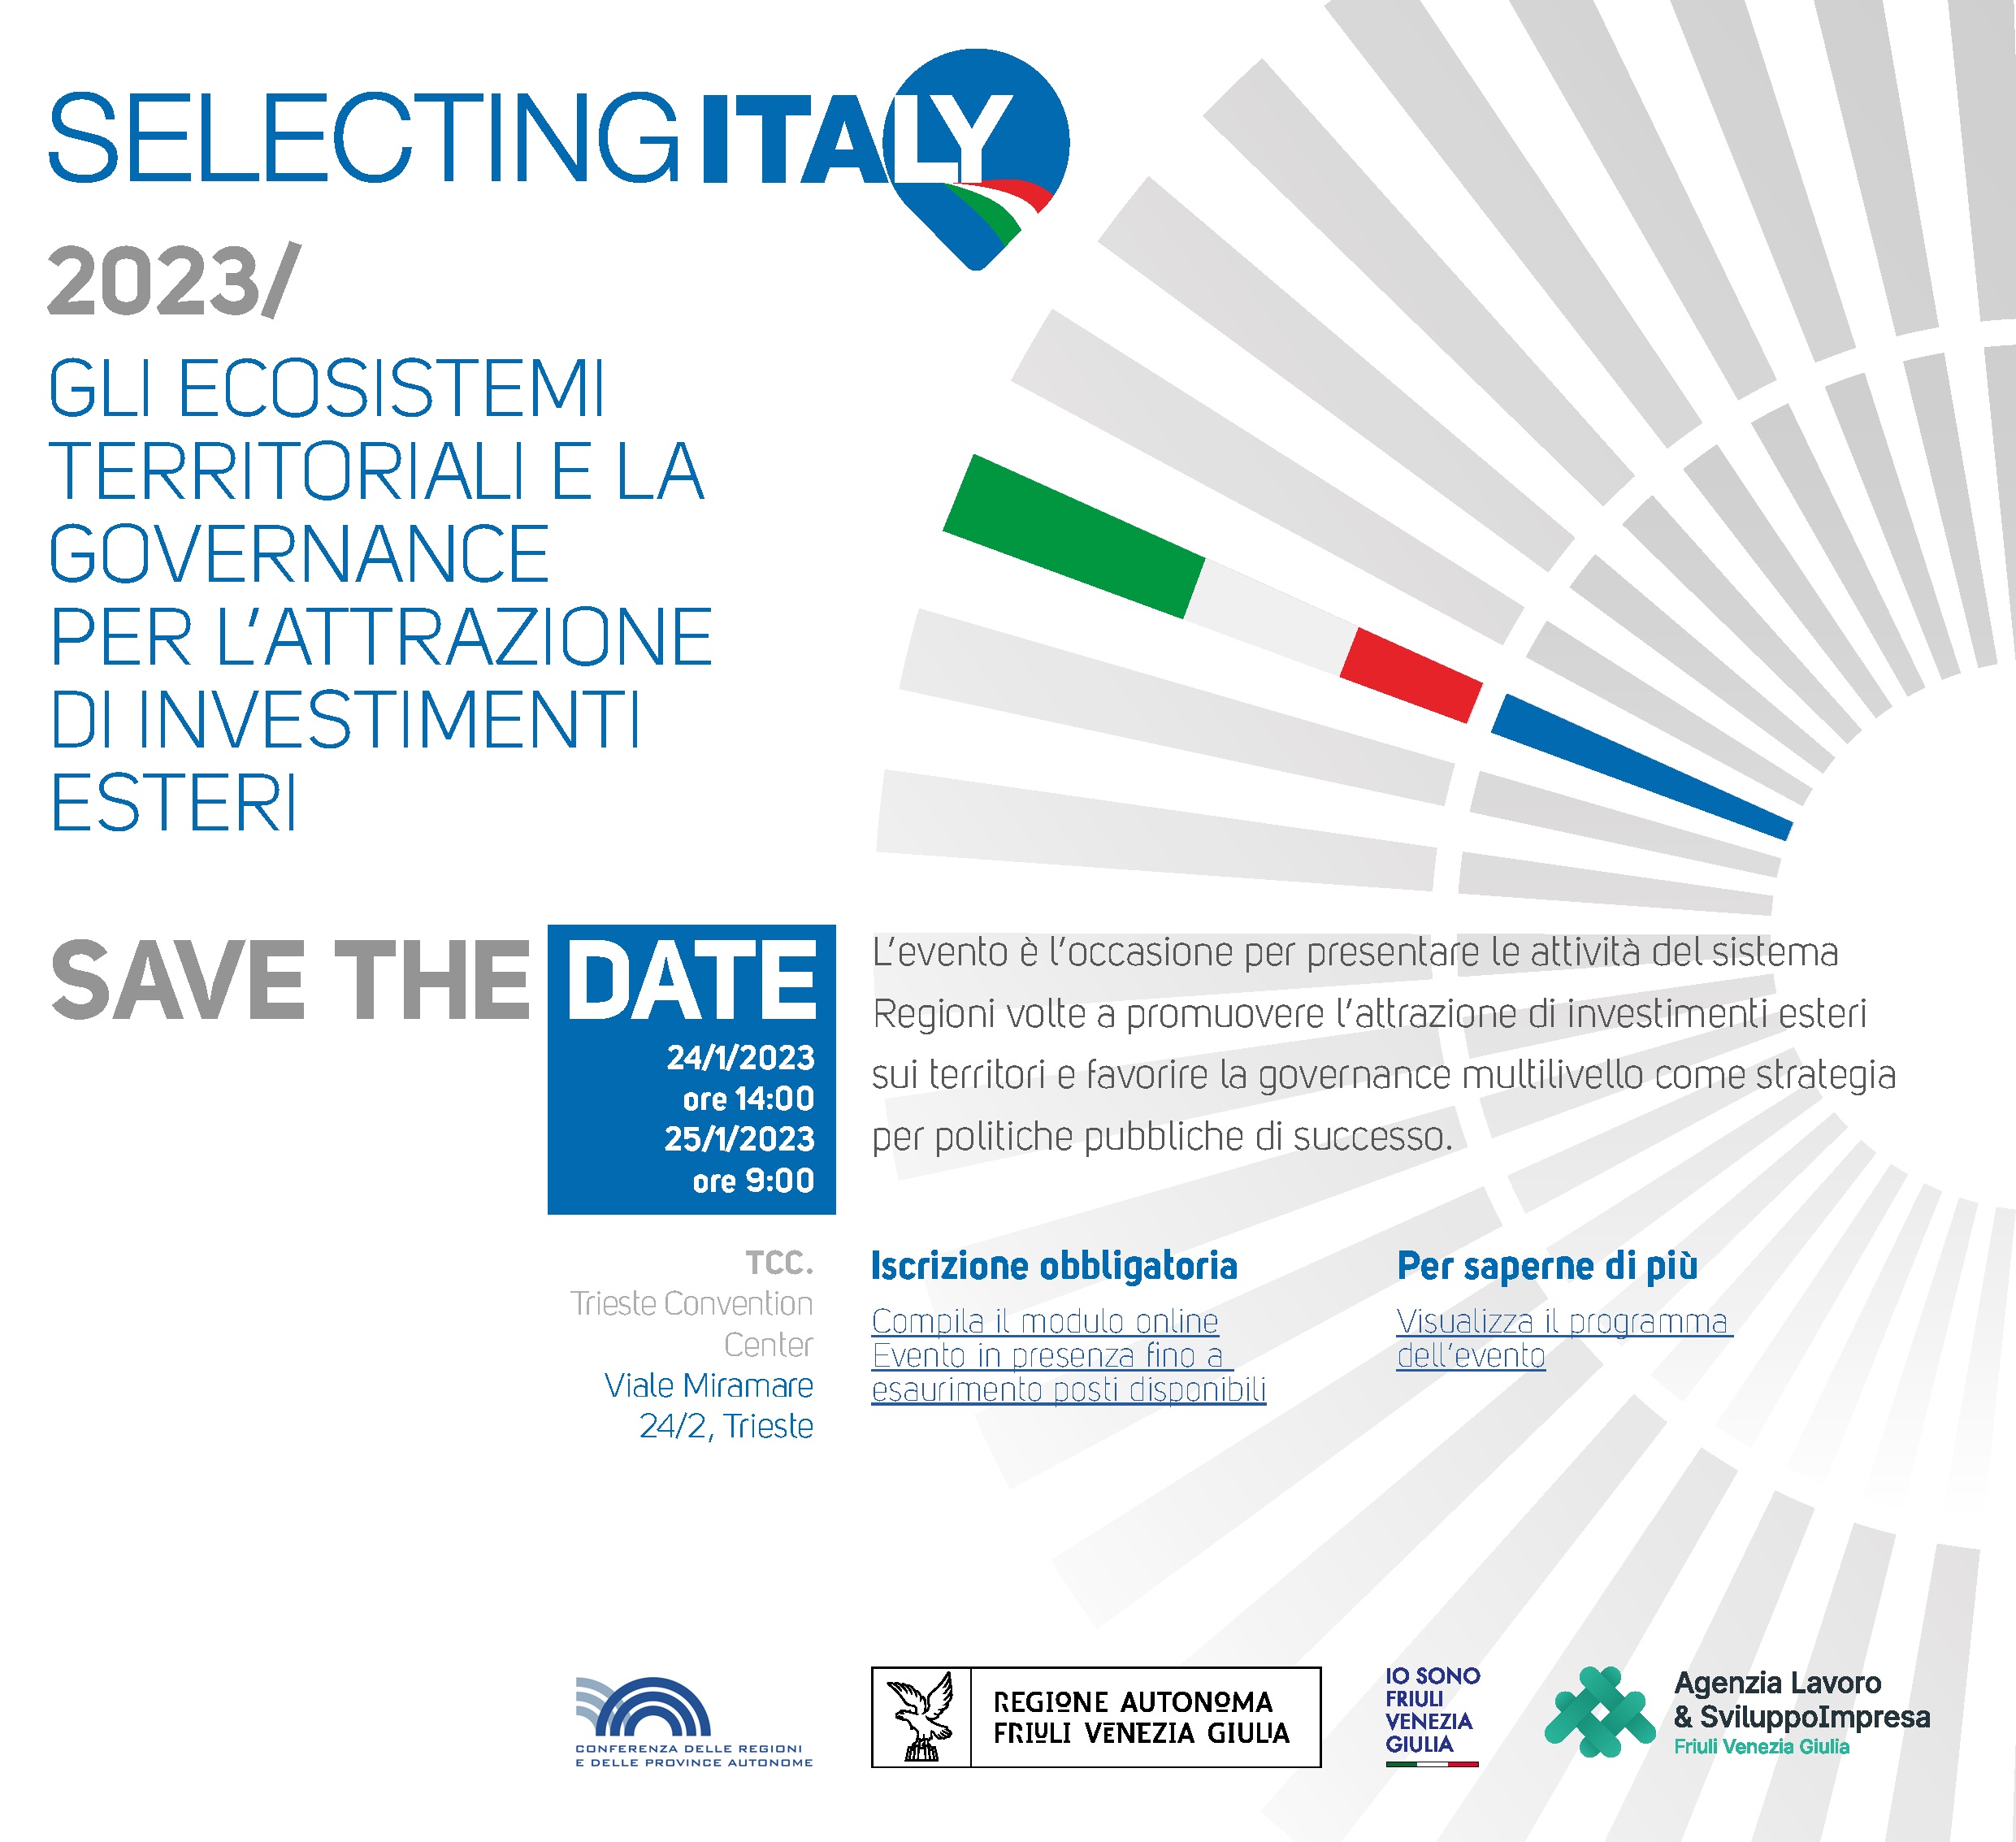 file/ELEMENTO_NEWSLETTER/25130/save_the_date_fvg.jpg